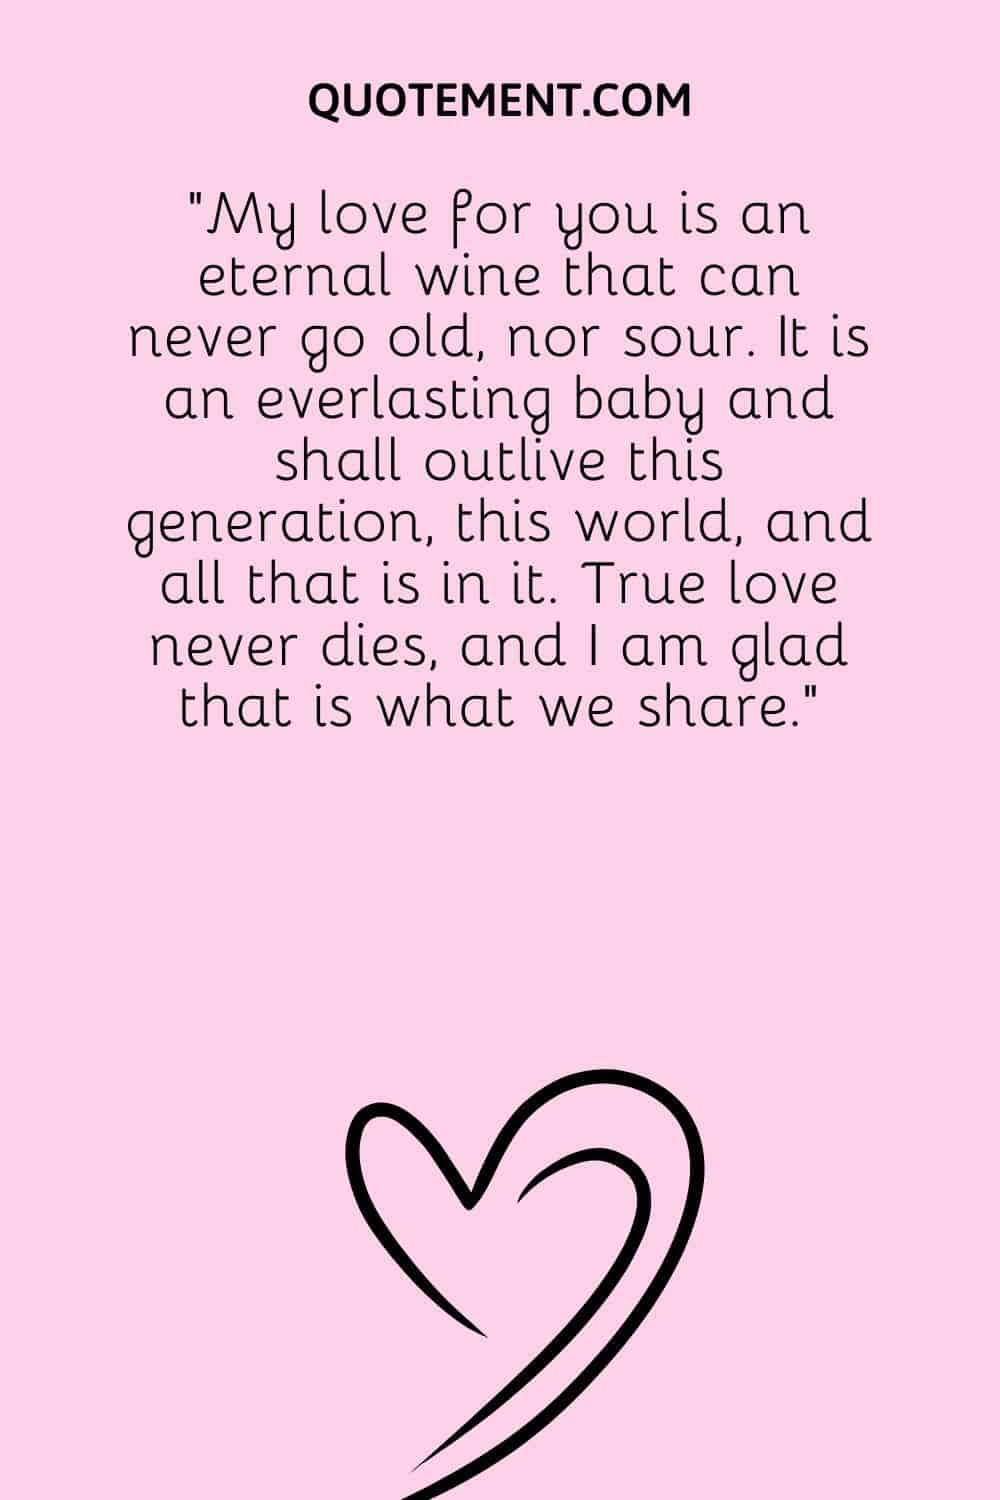 My love for you is an eternal wine that can never go old,